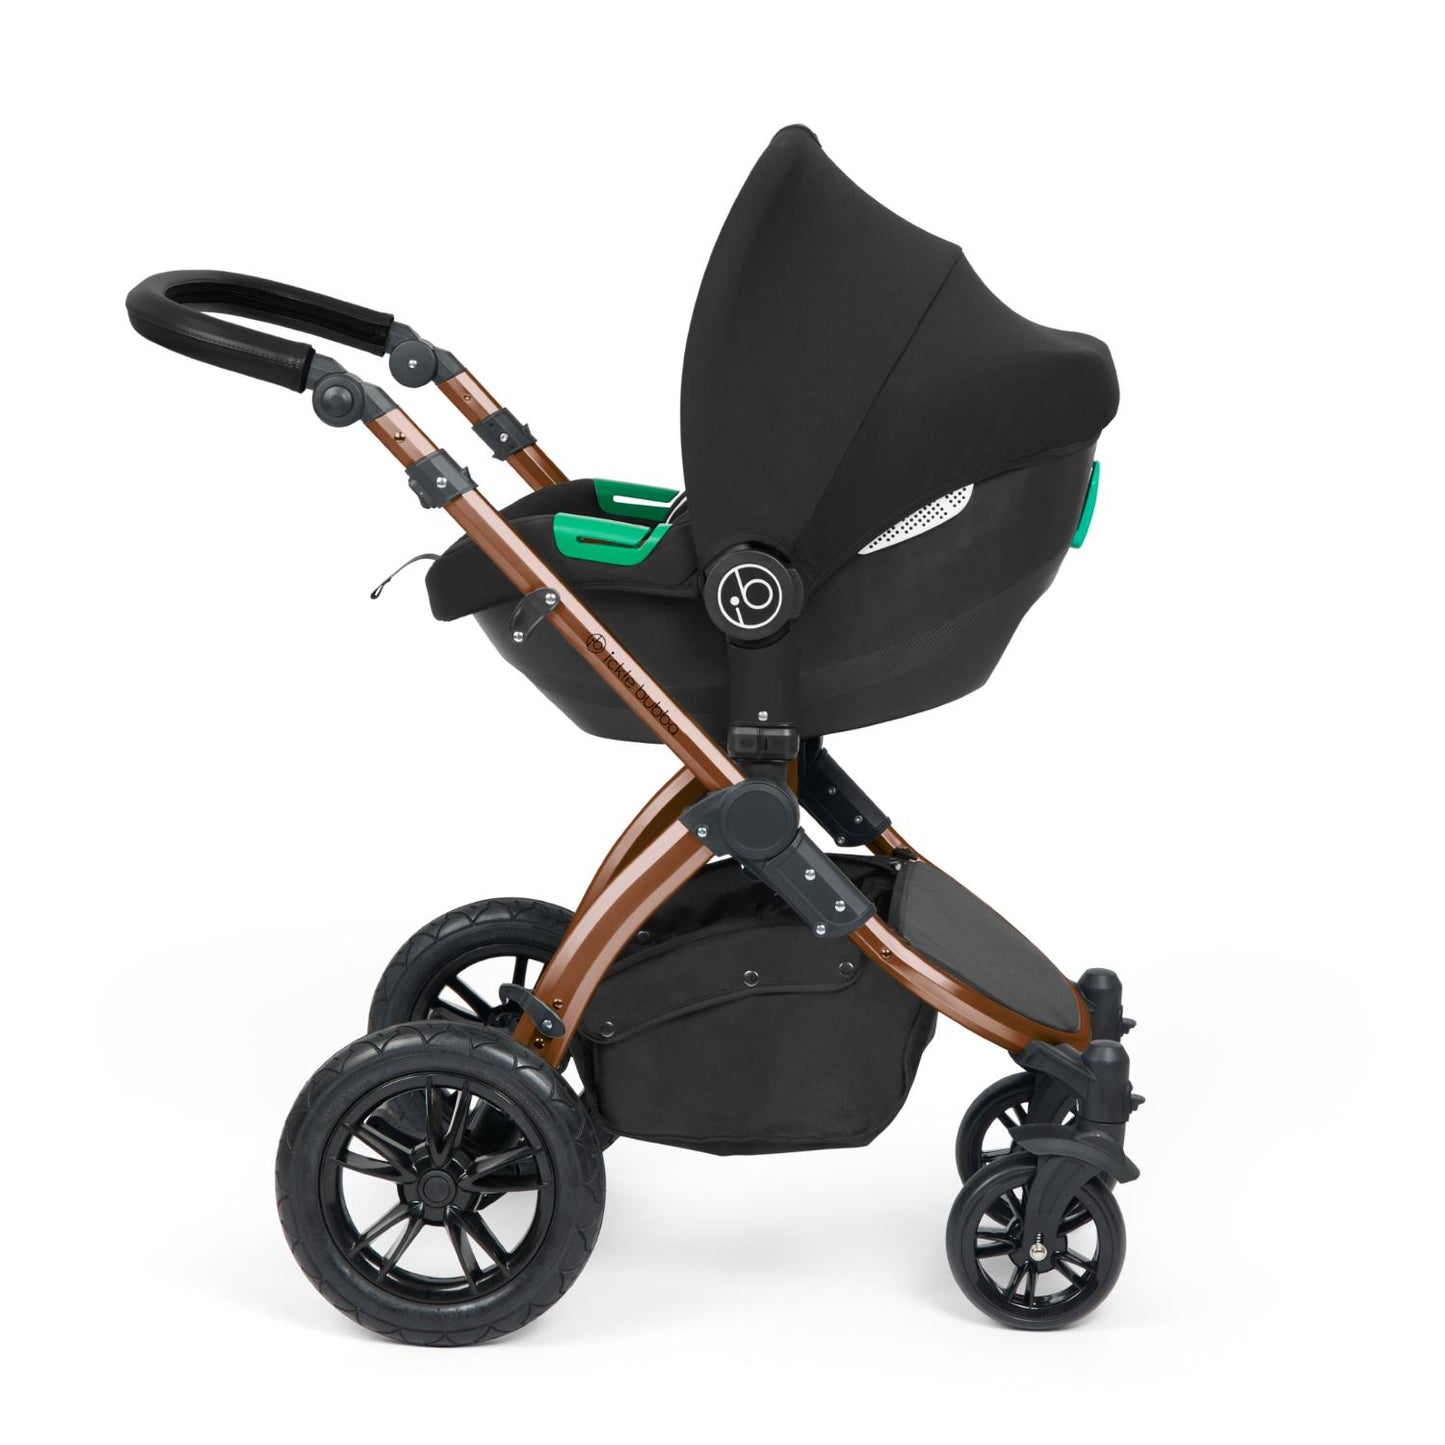 Ickle Bubba Stomp Luxe Pushchair with Cirrus i-Size car seat attached in Woodland green colour with bronze chassis